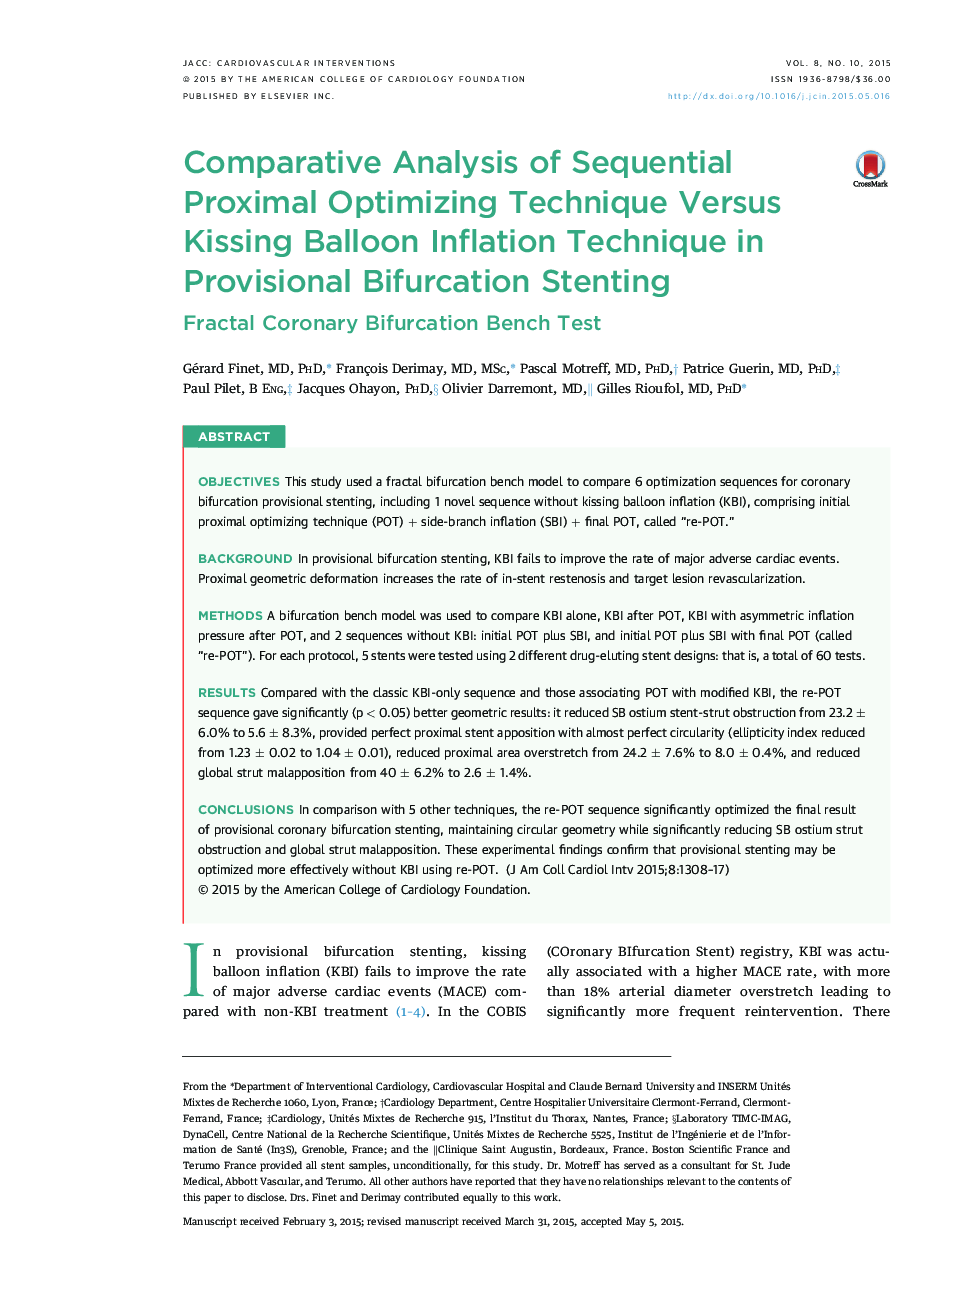 Comparative Analysis of Sequential Proximal Optimizing Technique Versus Kissing Balloon Inflation Technique in Provisional Bifurcation Stenting : Fractal Coronary Bifurcation Bench Test